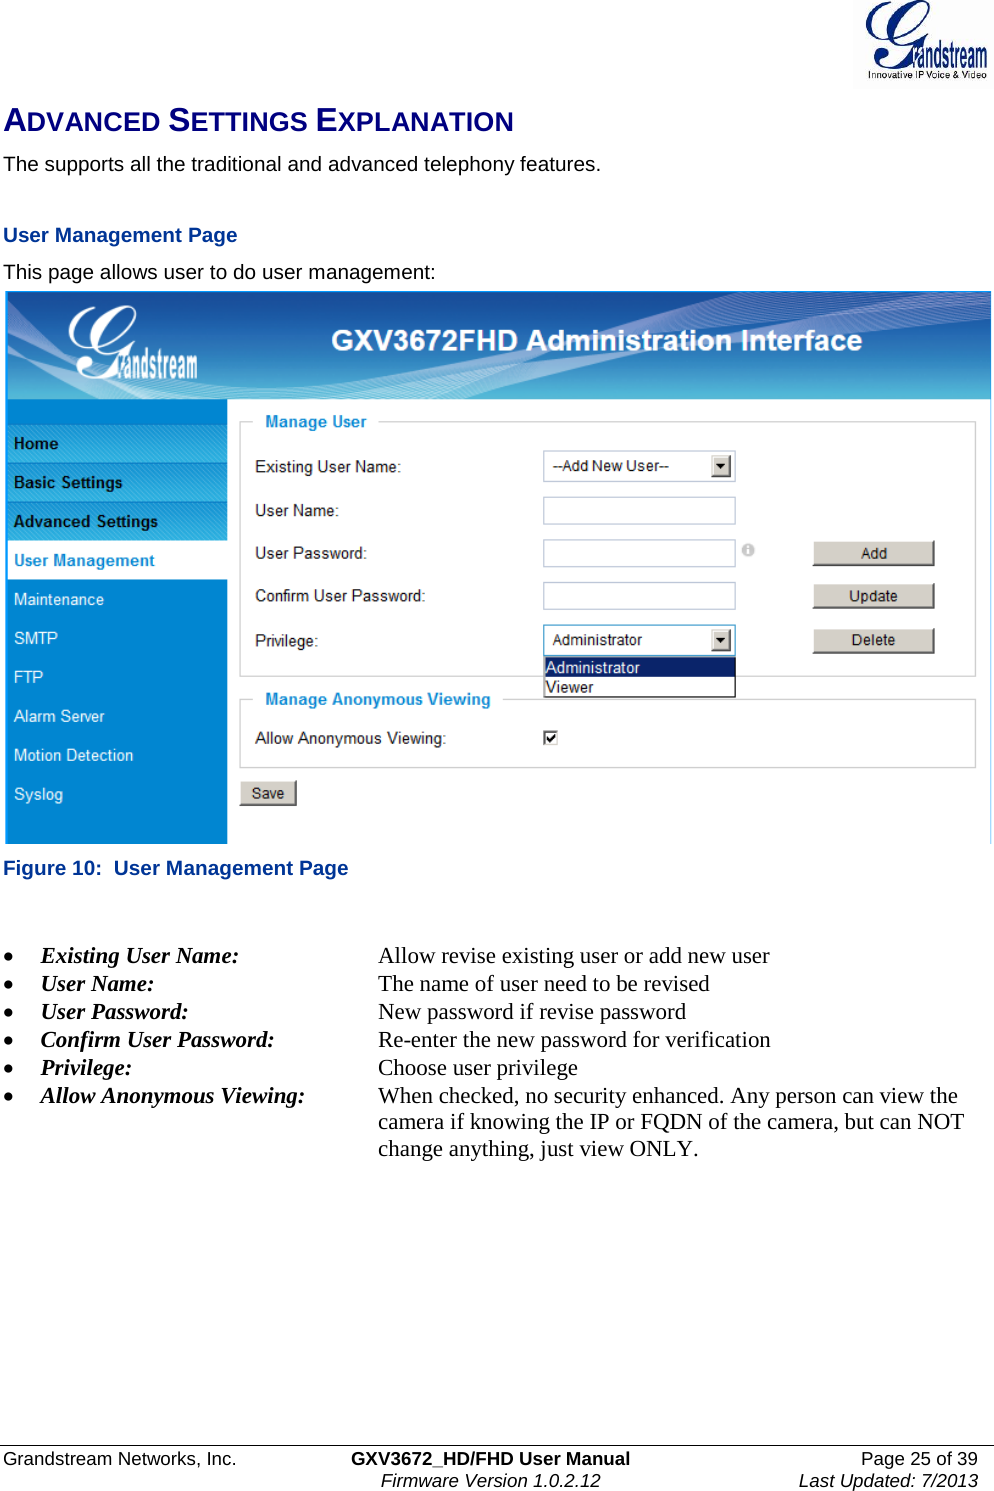  Grandstream Networks, Inc. GXV3672_HD/FHD User Manual Page 25 of 39   Firmware Version 1.0.2.12 Last Updated: 7/2013  ADVANCED SETTINGS EXPLANATION The supports all the traditional and advanced telephony features.     User Management Page  This page allows user to do user management:  Figure 10:  User Management Page  • Existing User Name:     Allow revise existing user or add new user • User Name:   The name of user need to be revised • User Password:       New password if revise password • Confirm User Password:     Re-enter the new password for verification • Privilege:     Choose user privilege • Allow Anonymous Viewing:  When checked, no security enhanced. Any person can view the       camera if knowing the IP or FQDN of the camera, but can NOT       change anything, just view ONLY.    